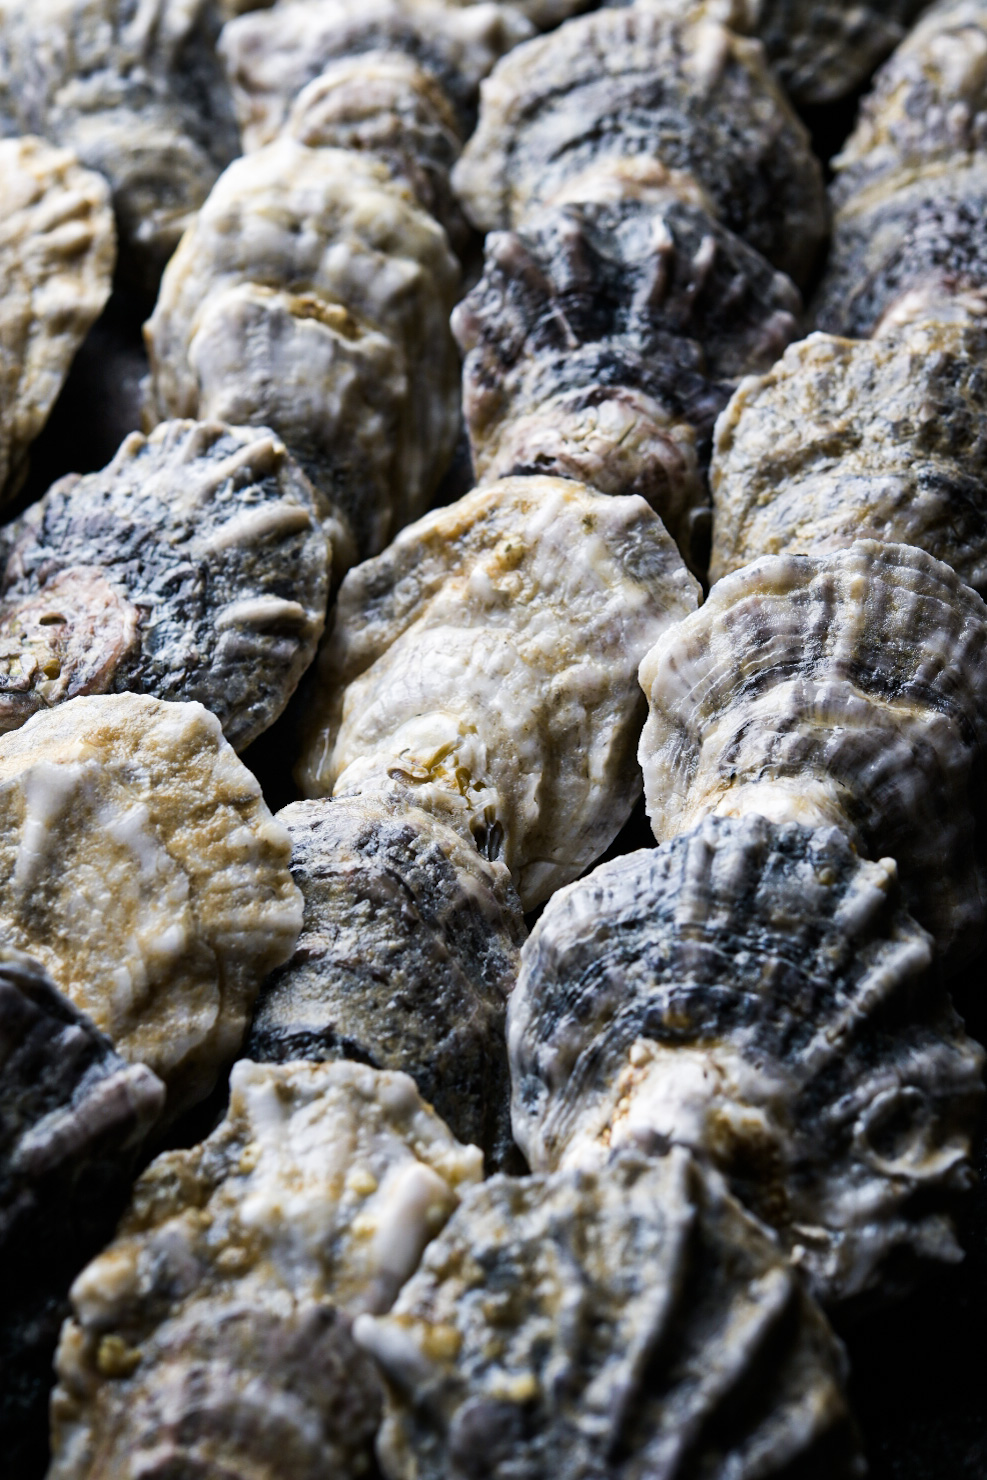 Rows of Southern Belle oysters packed for delivery